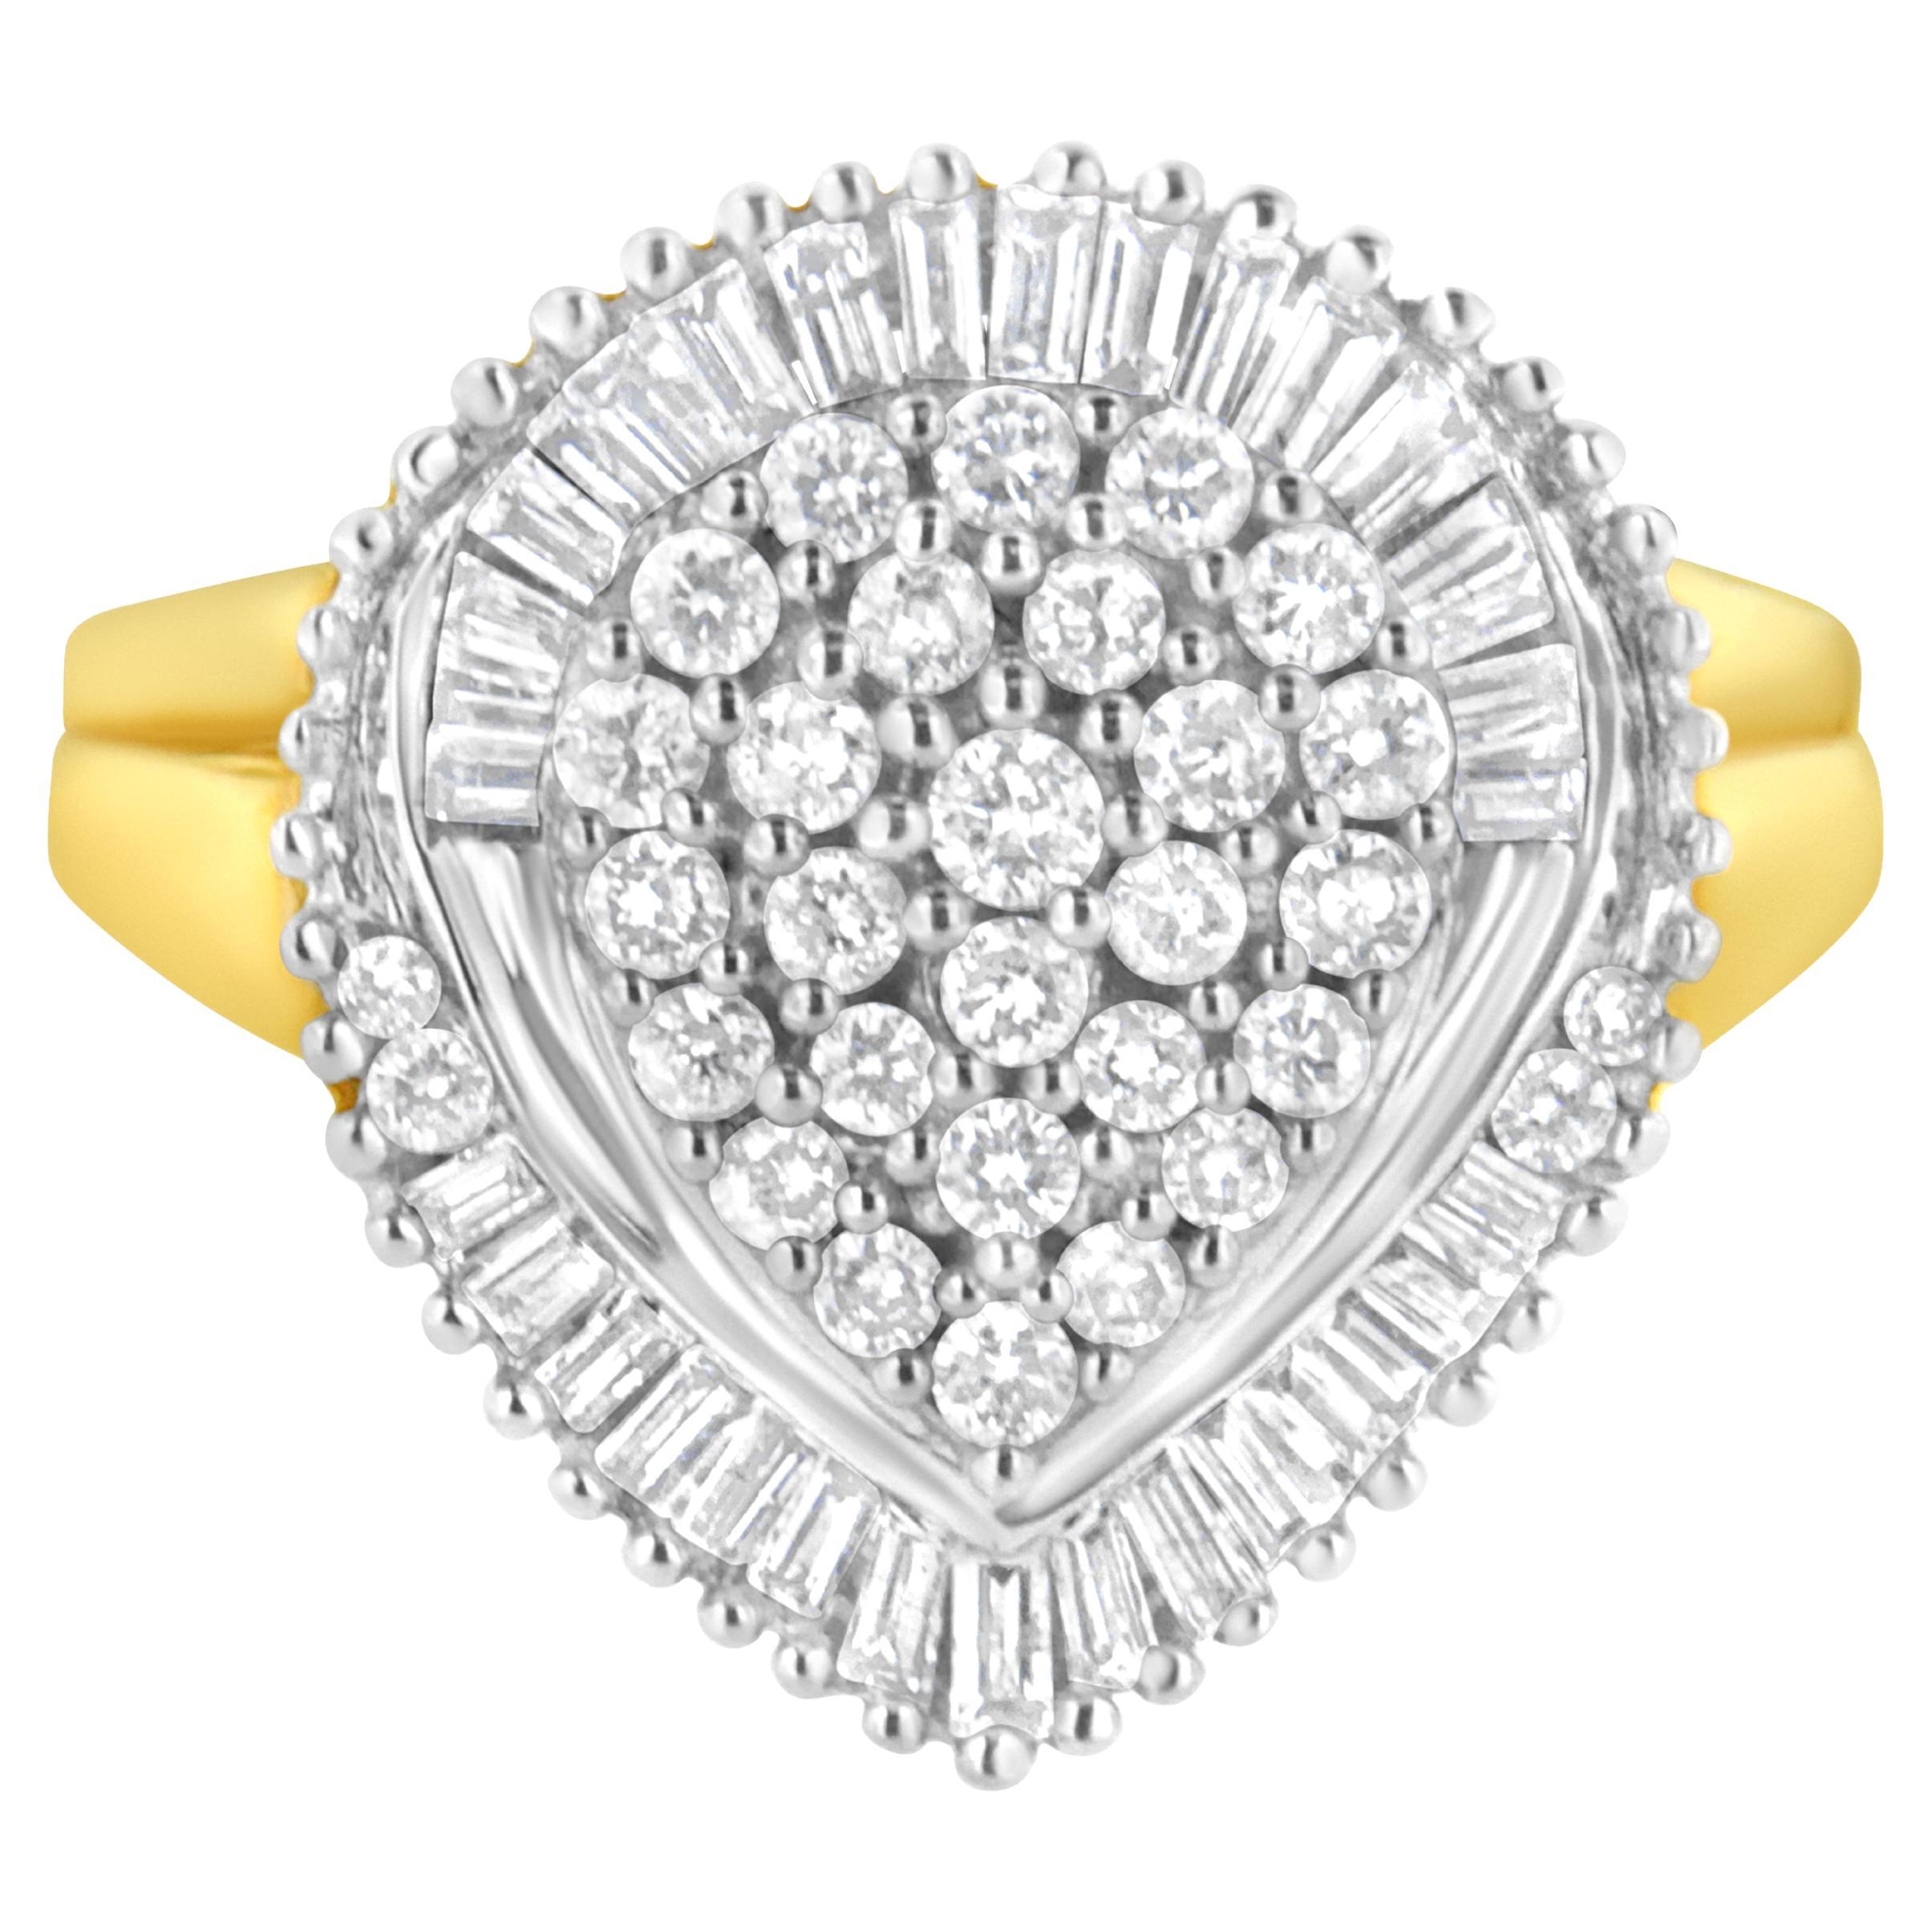 For Sale:  10K Yellow Gold 1.0 Cttw Round and Baguette Cut Diamond Oval Shaped Cluster Ring